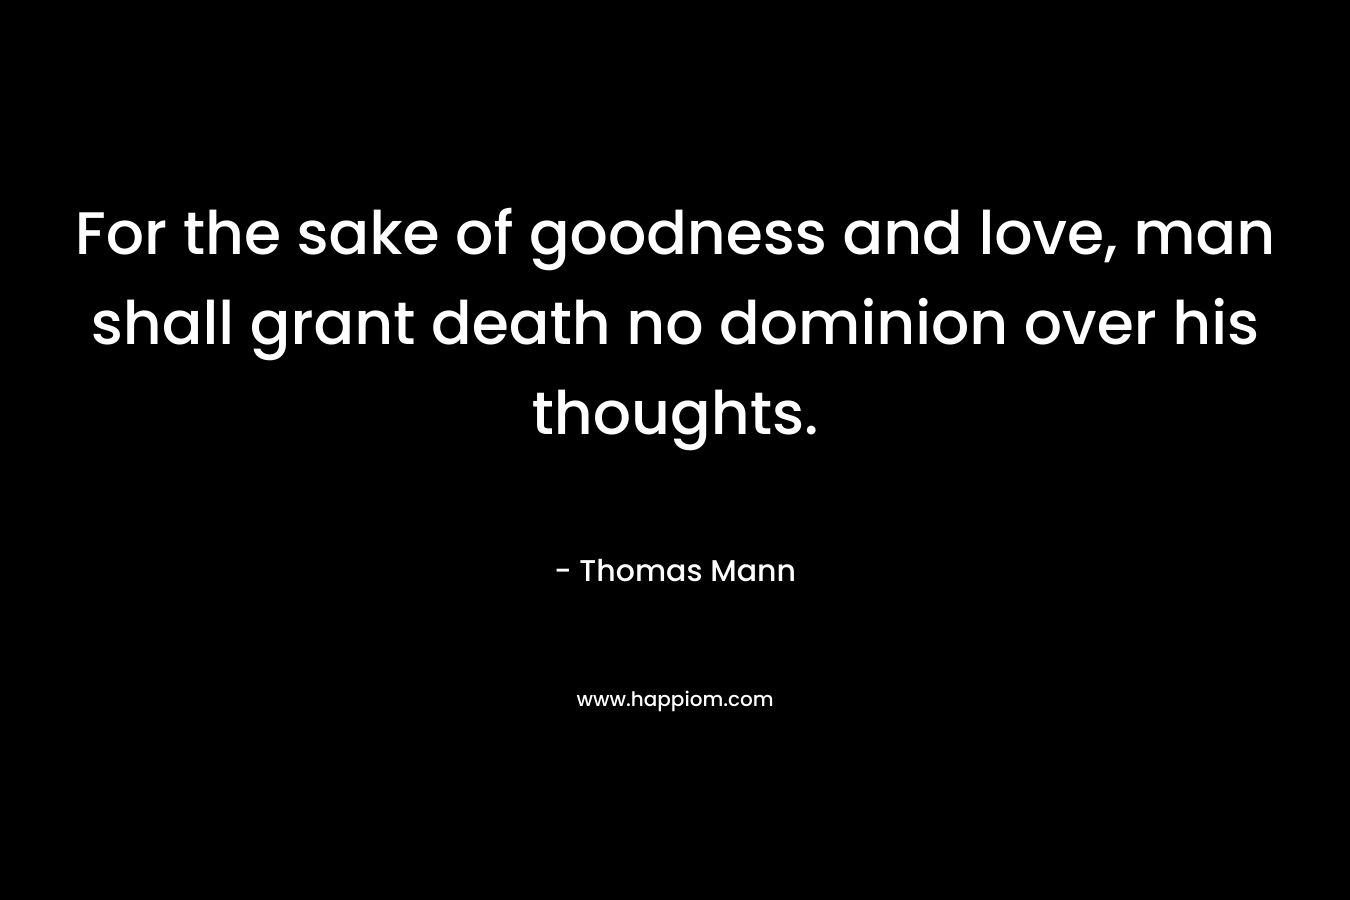 For the sake of goodness and love, man shall grant death no dominion over his thoughts. – Thomas Mann